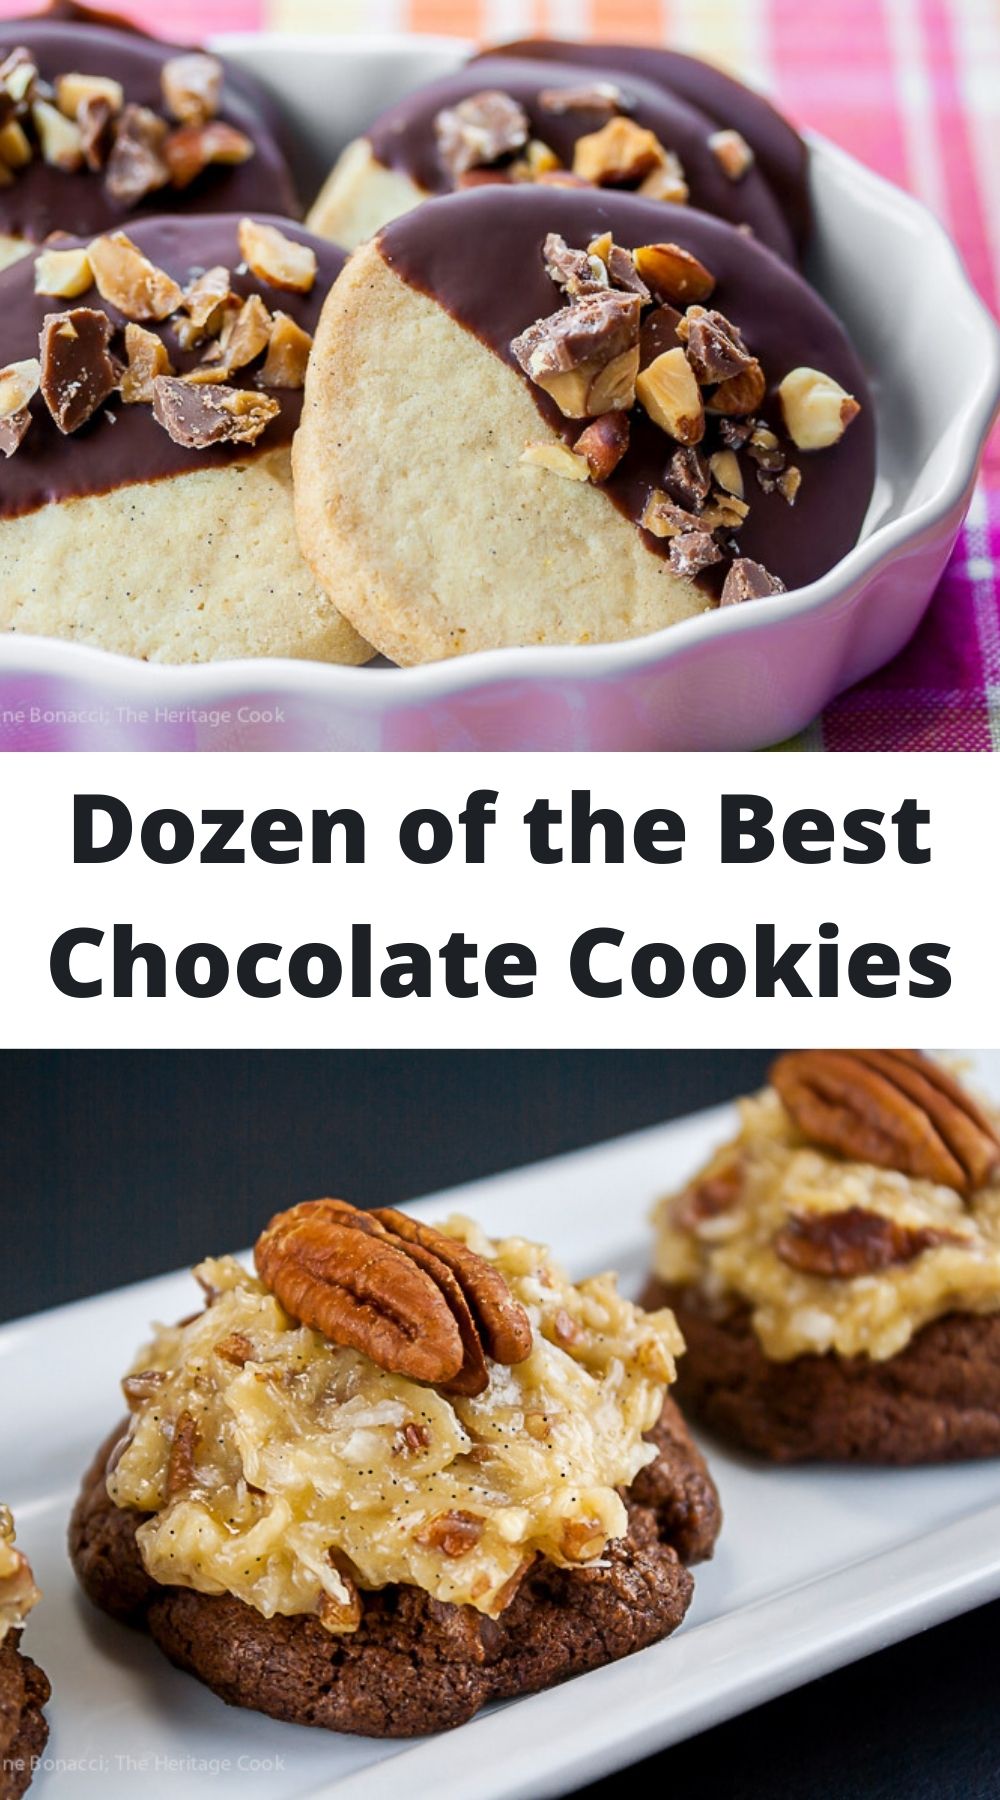 A Dozen of the Best Chocolate Cookie Recipes collection; assembled by Jane Bonacci, The Heritage Cook